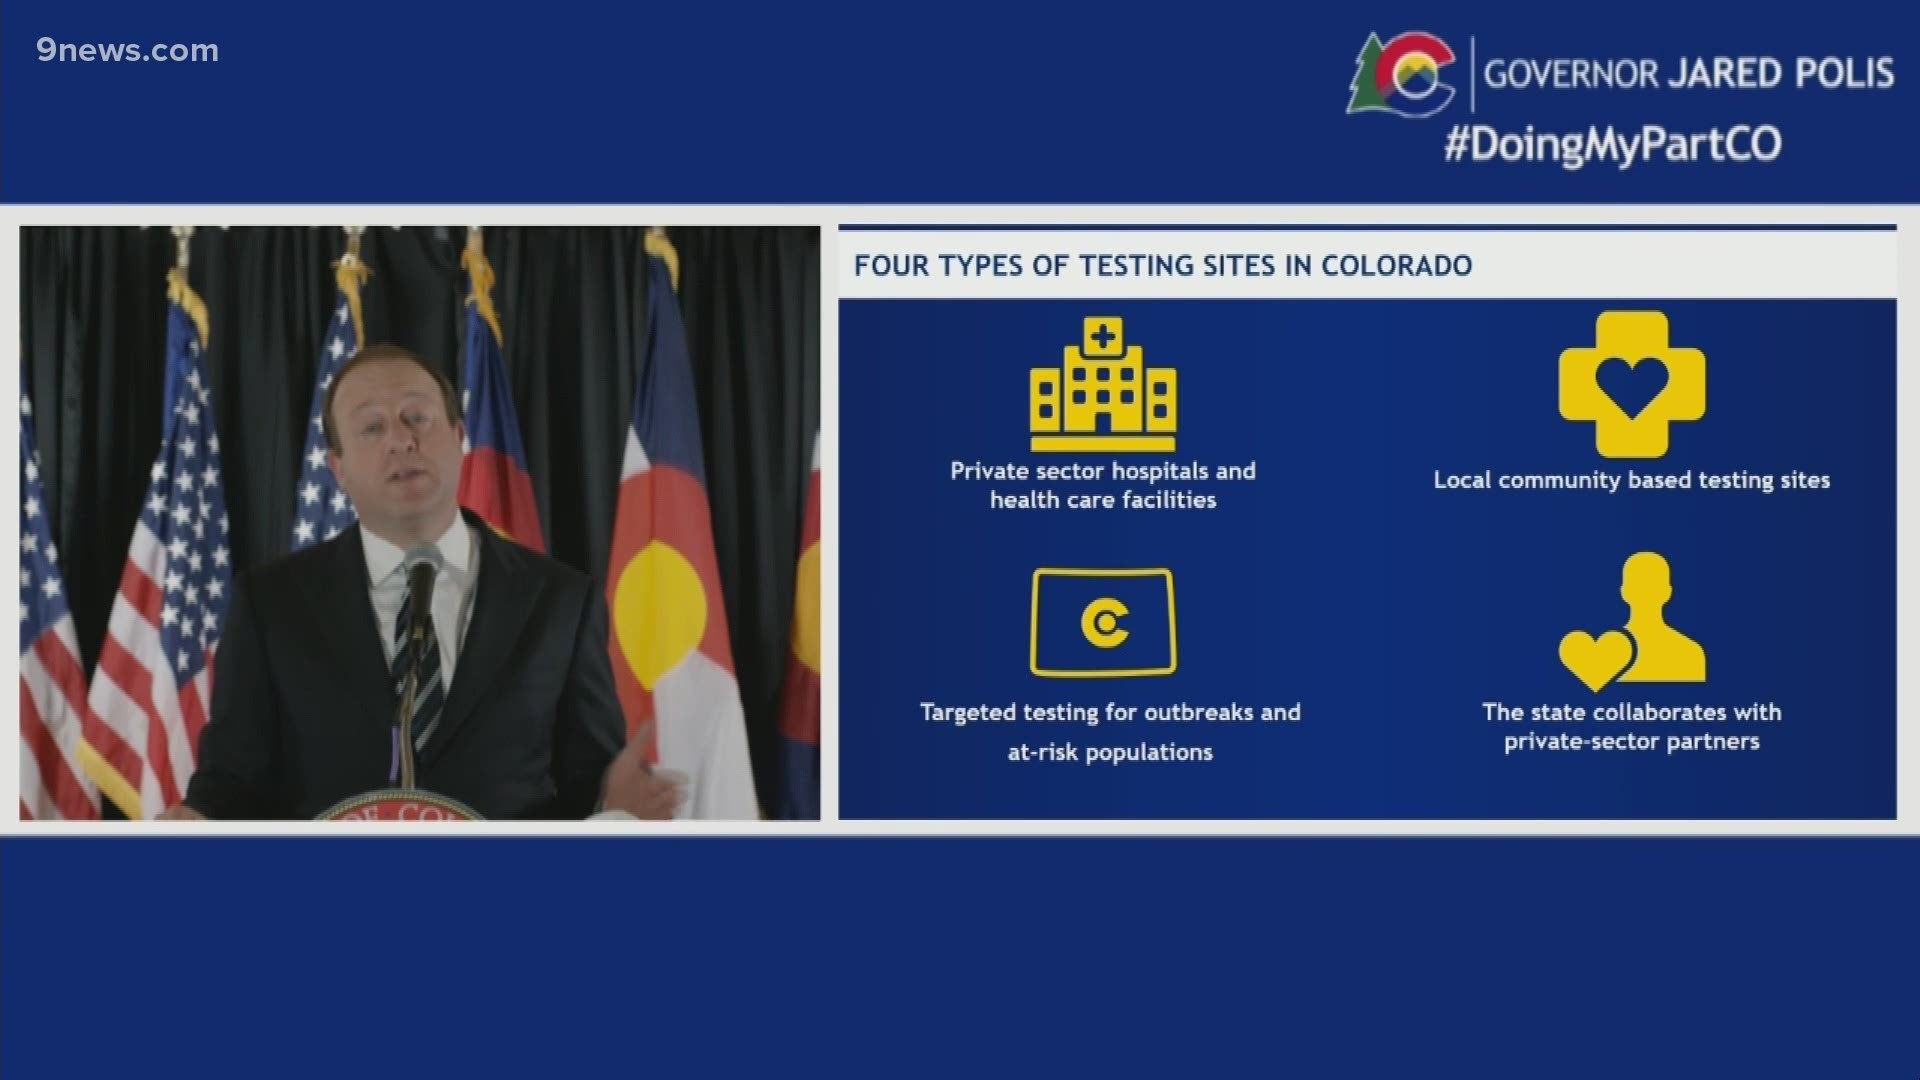 The governor said Colorado is aiming to bolster its testing and has launched a website to help track outbreaks of the novel coronavirus.